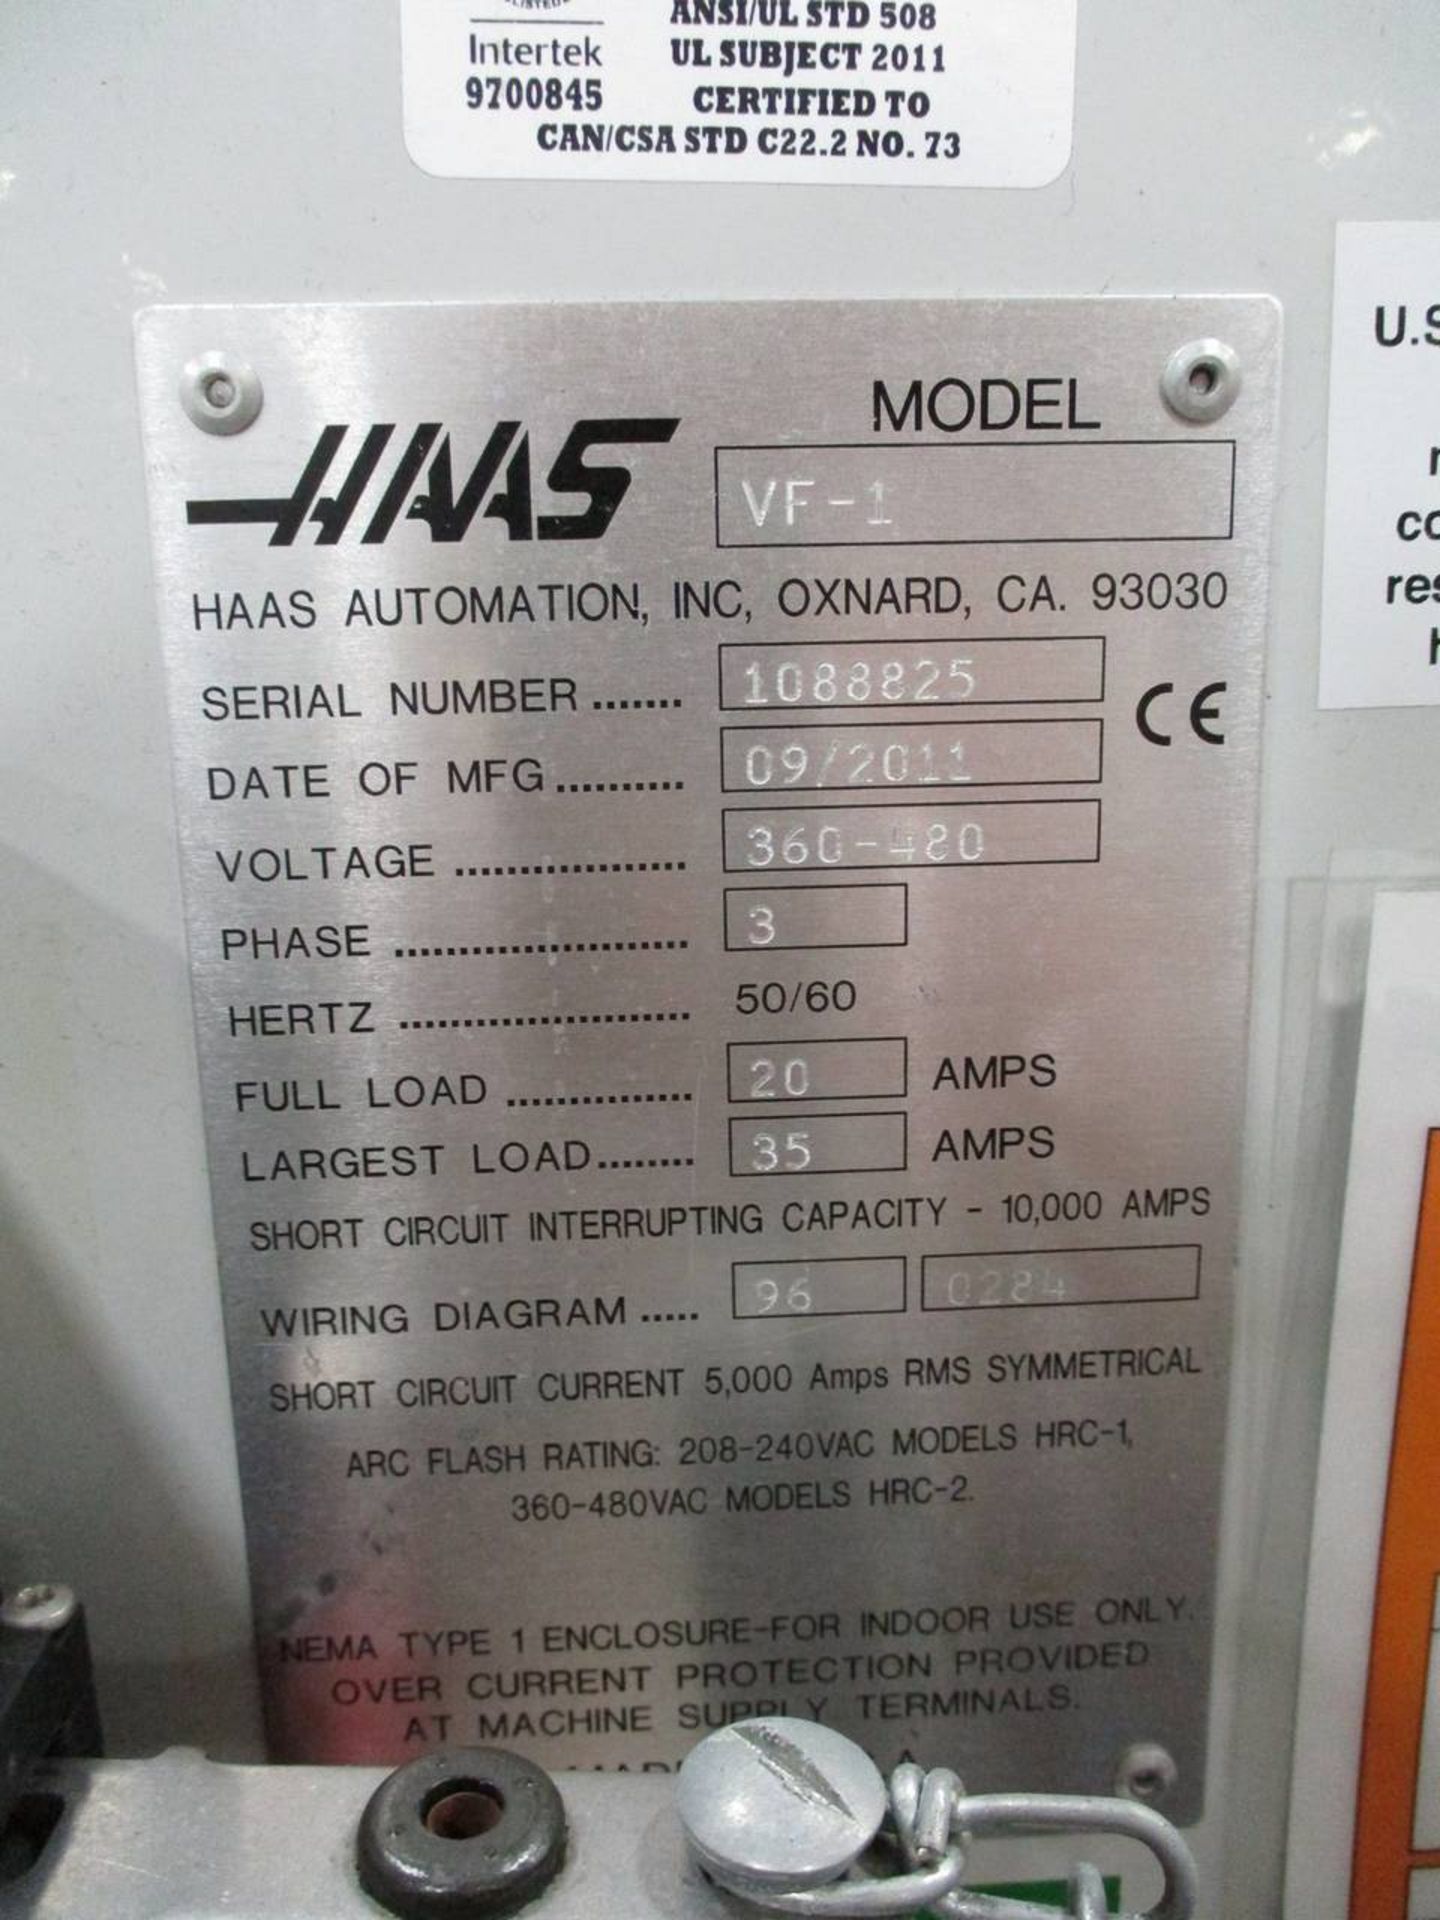 2011 Haas VF-1 3-Axis CNC Vertical Machining Center - Image 12 of 13